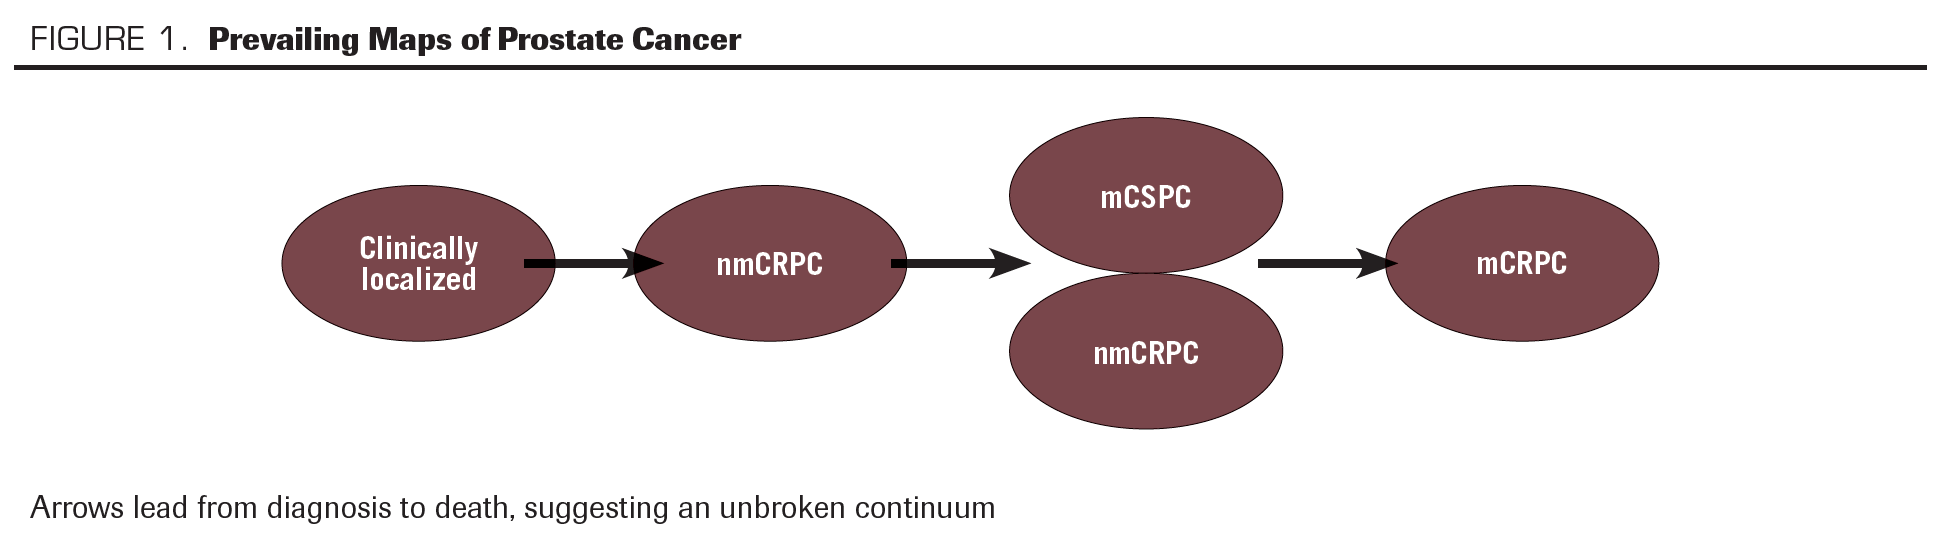 FIGURE 1. Prevailing Maps of Prostate Cancer